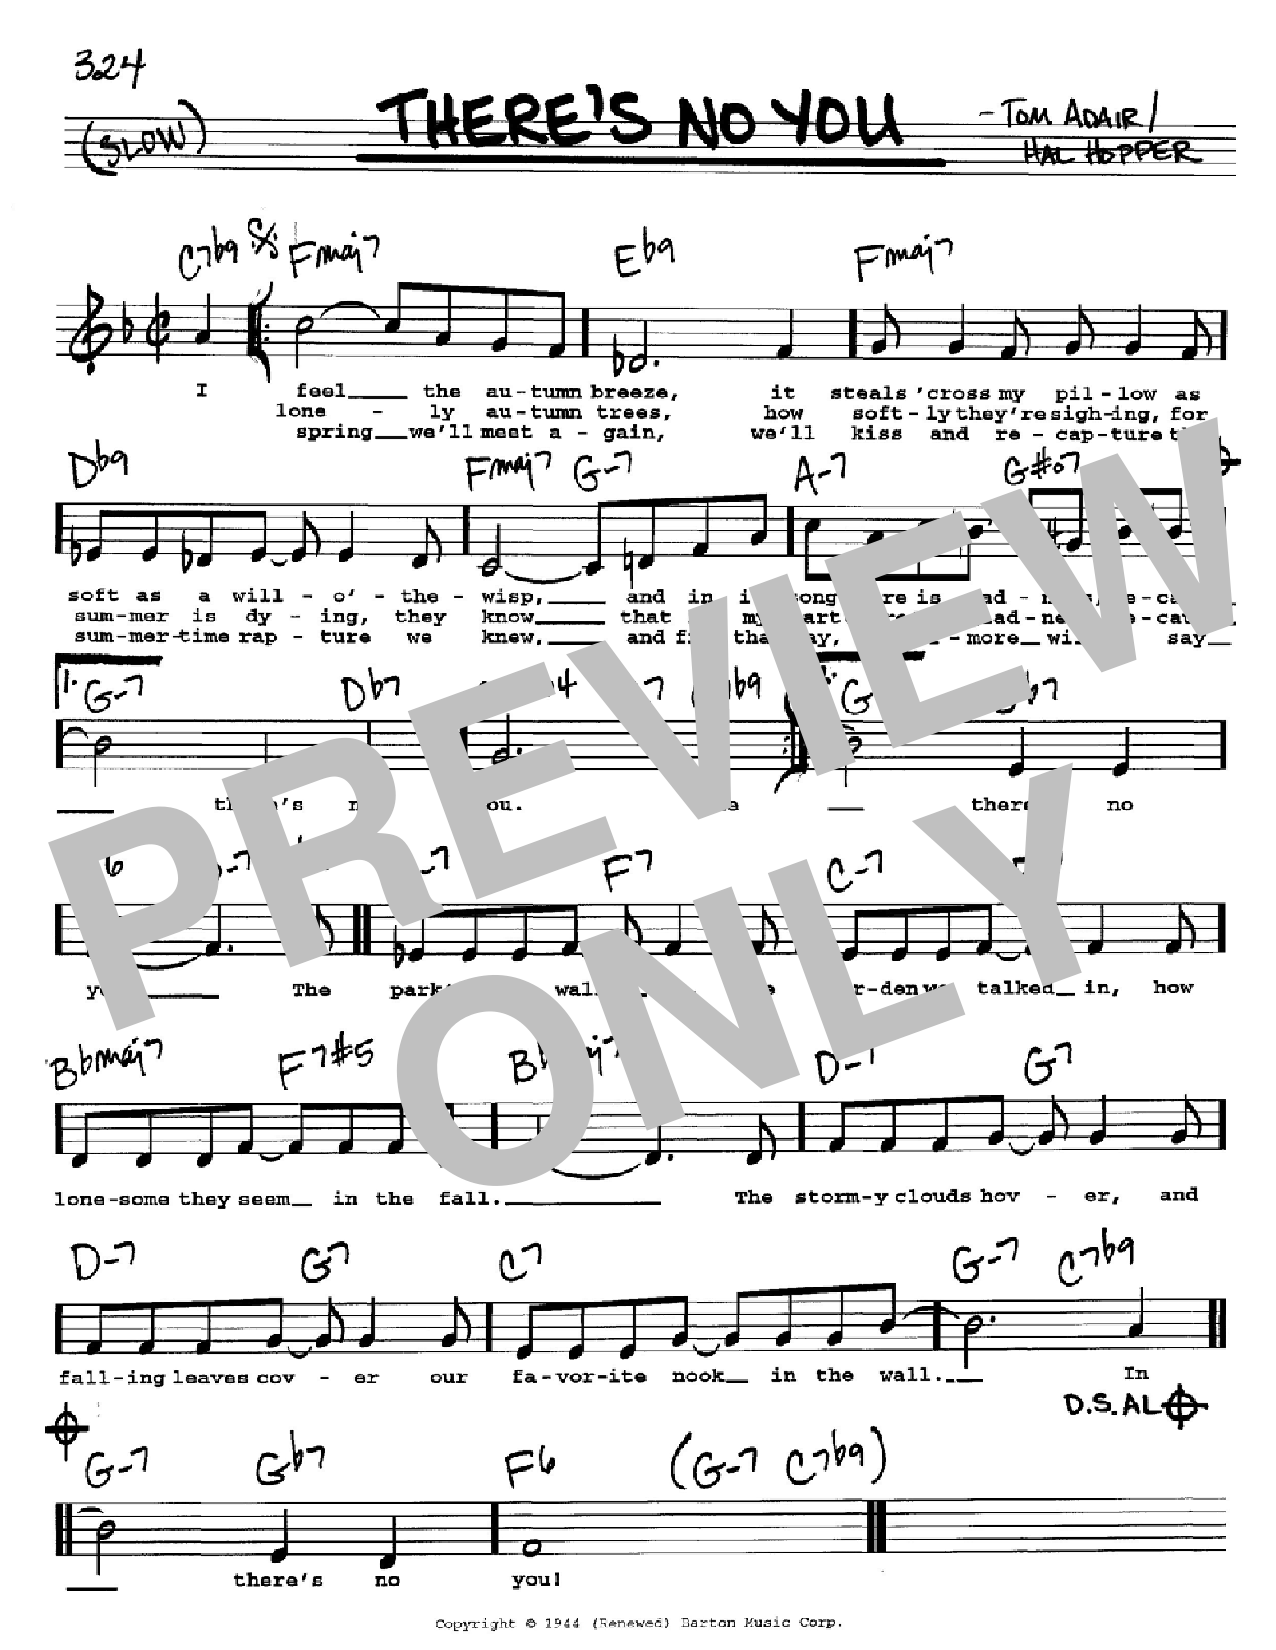 Download Tom Adair There's No You Sheet Music